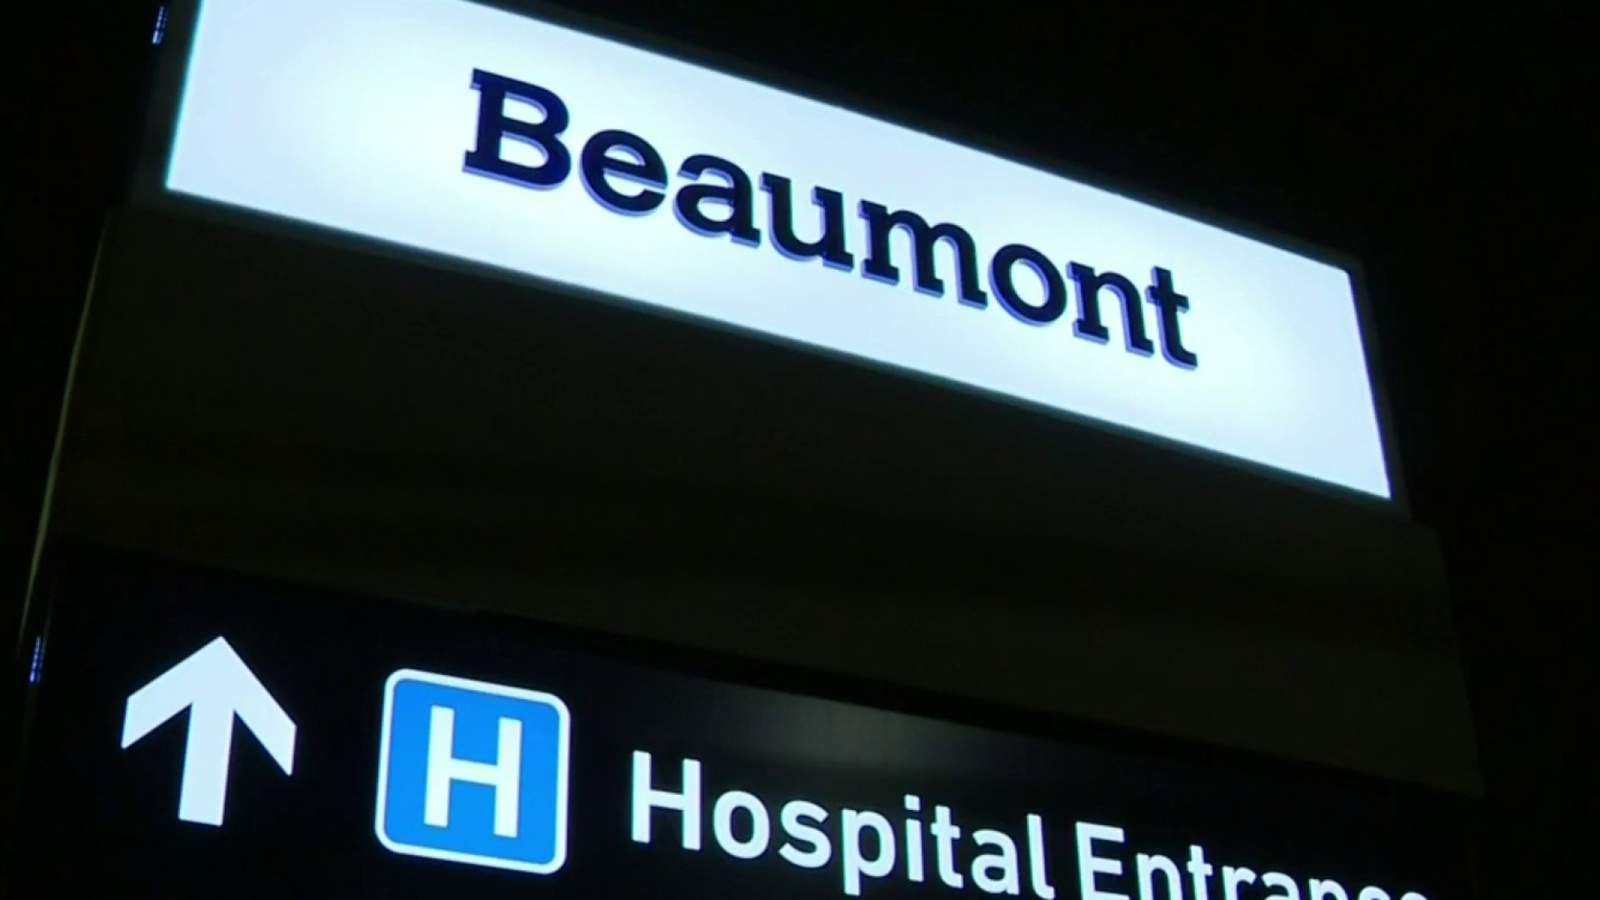 Beaumont hospitals restore visitor restrictions amid rising COVID cases